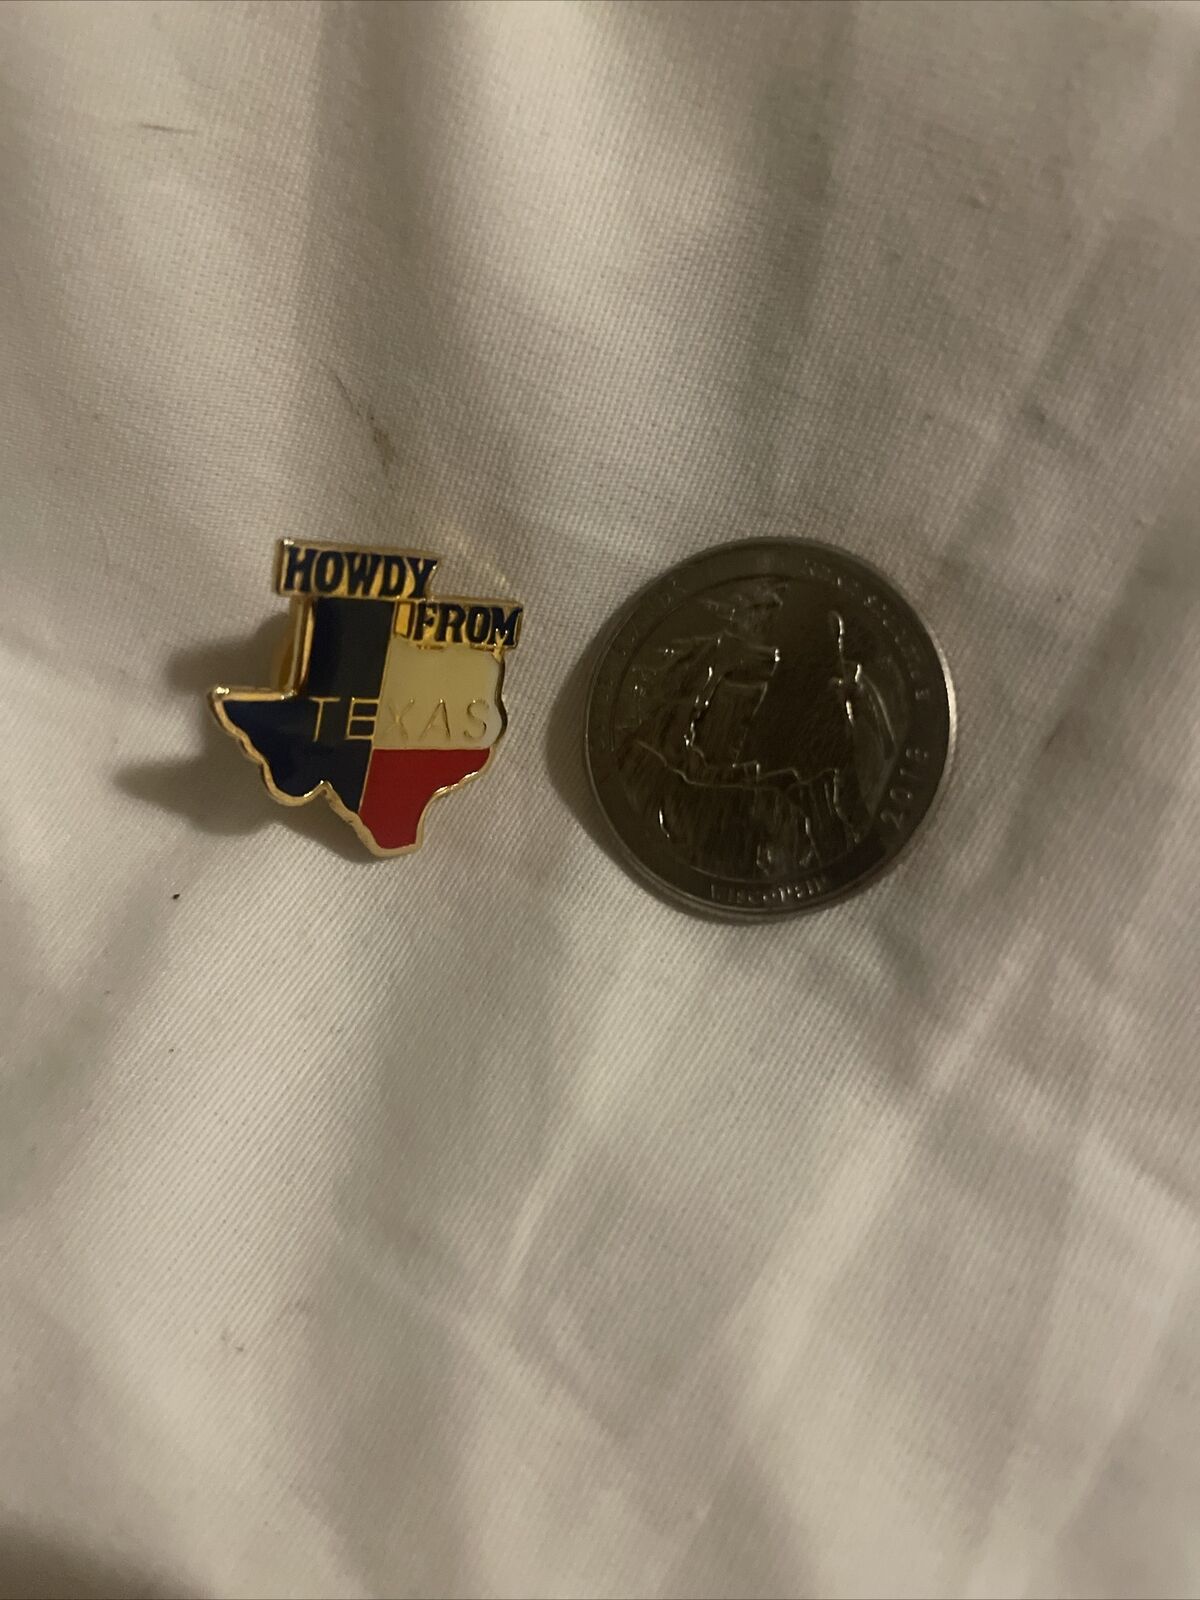 Howdy From Texas Vintage Pin Pinback Texas Map State Flag Souvenir Lapel Travel